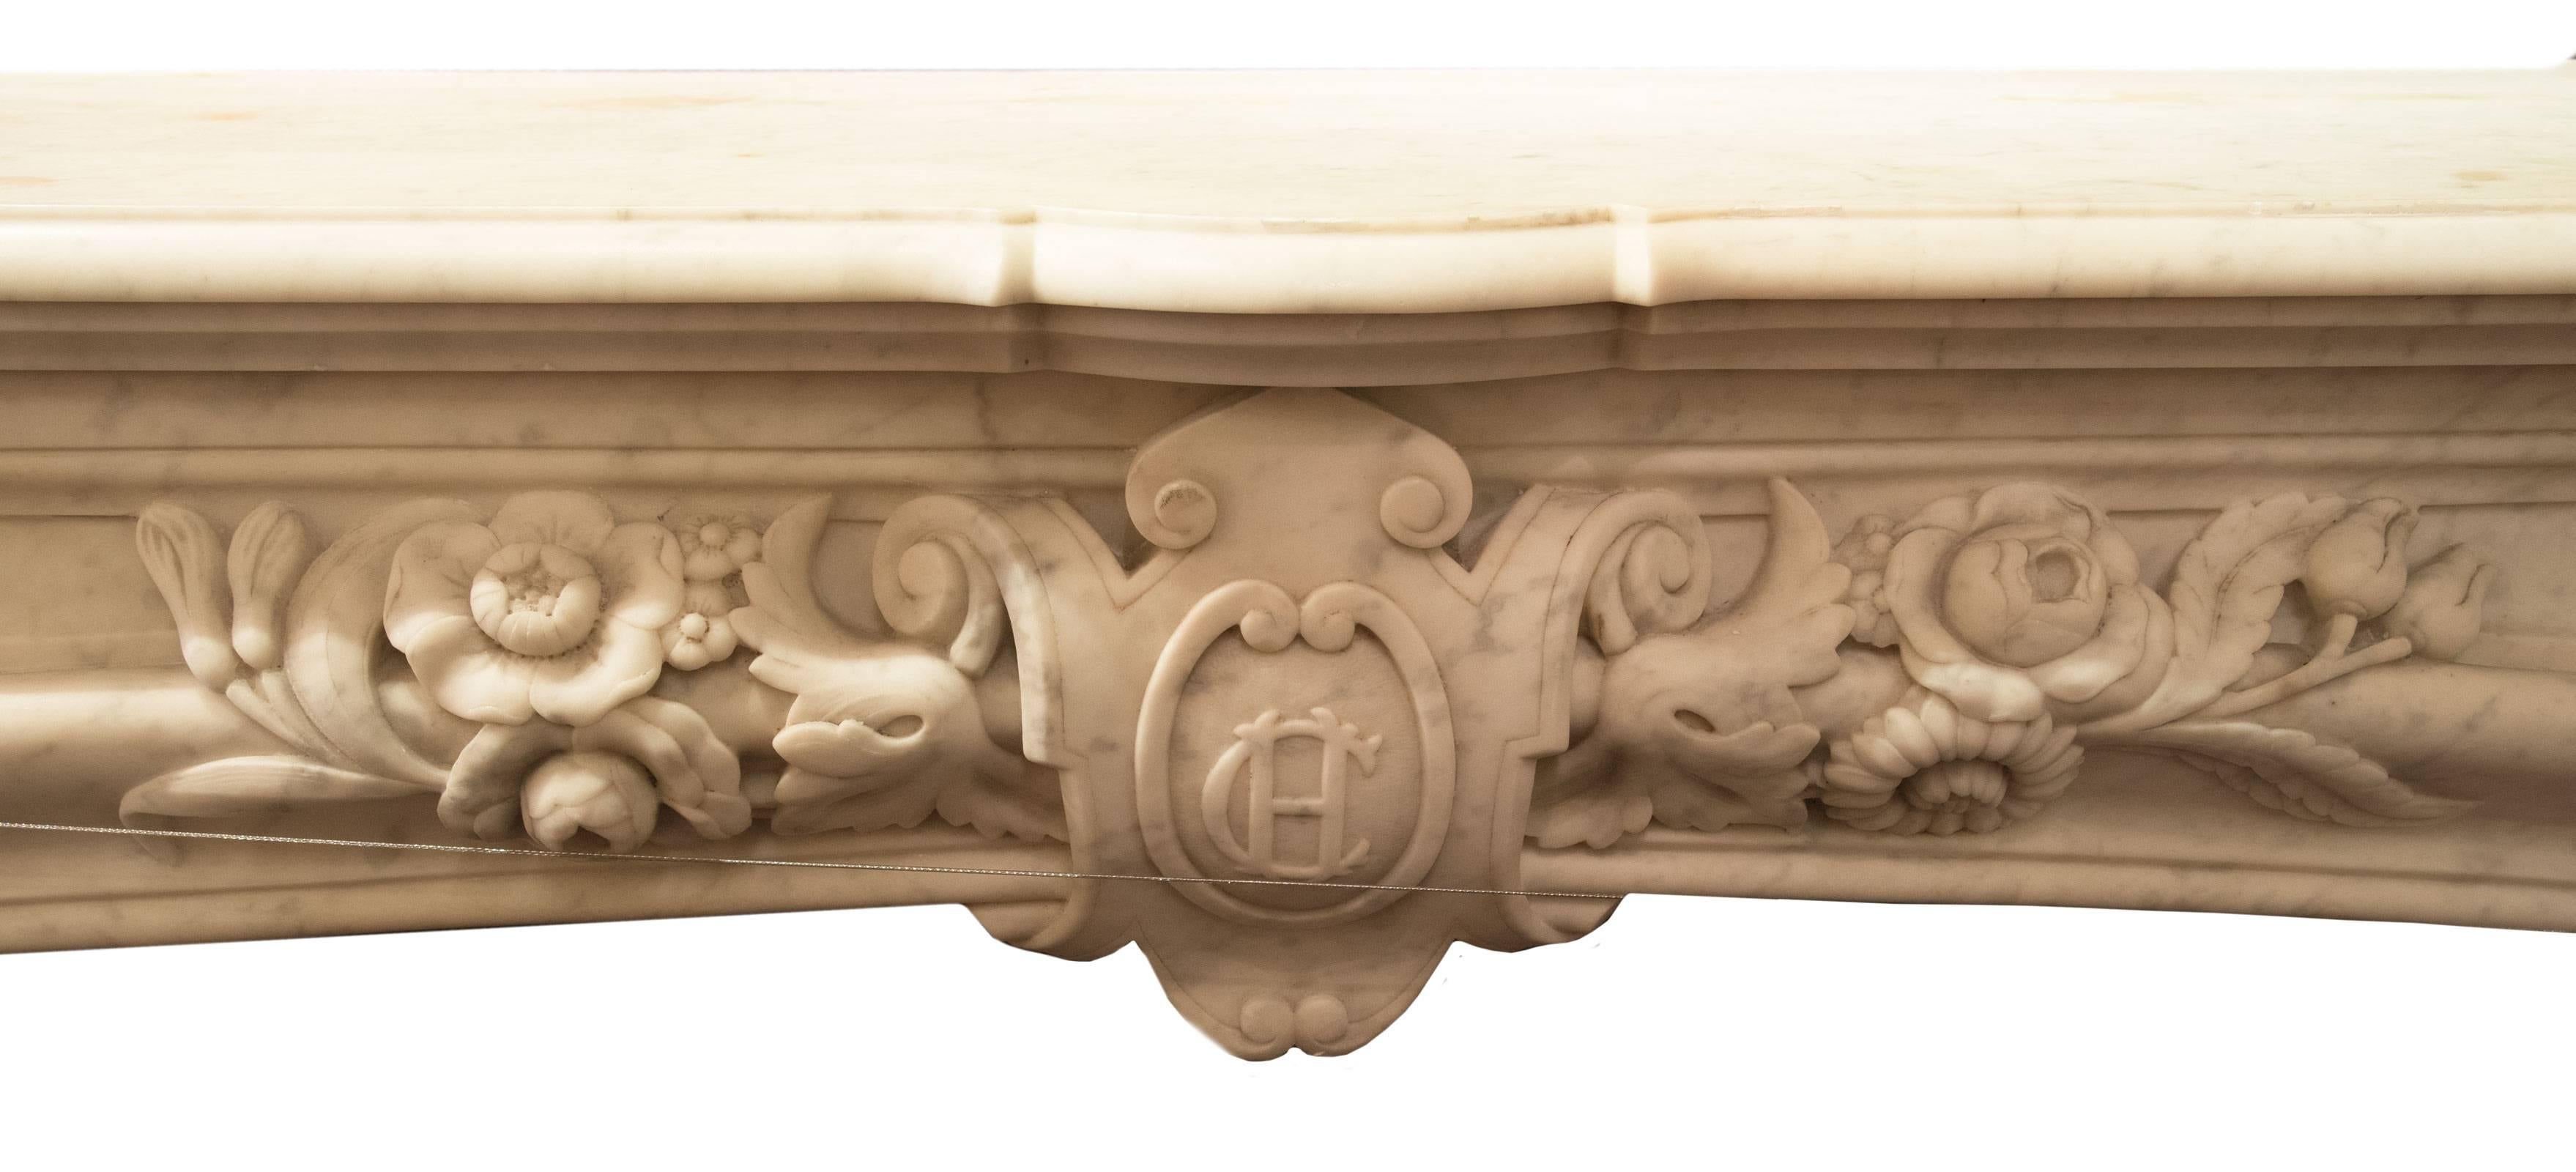 A handsome Louis XVI-style grey-marbled white Carrara fireplace surround with a shaped mantel above a frieze with carved central shield depicting the insignia 